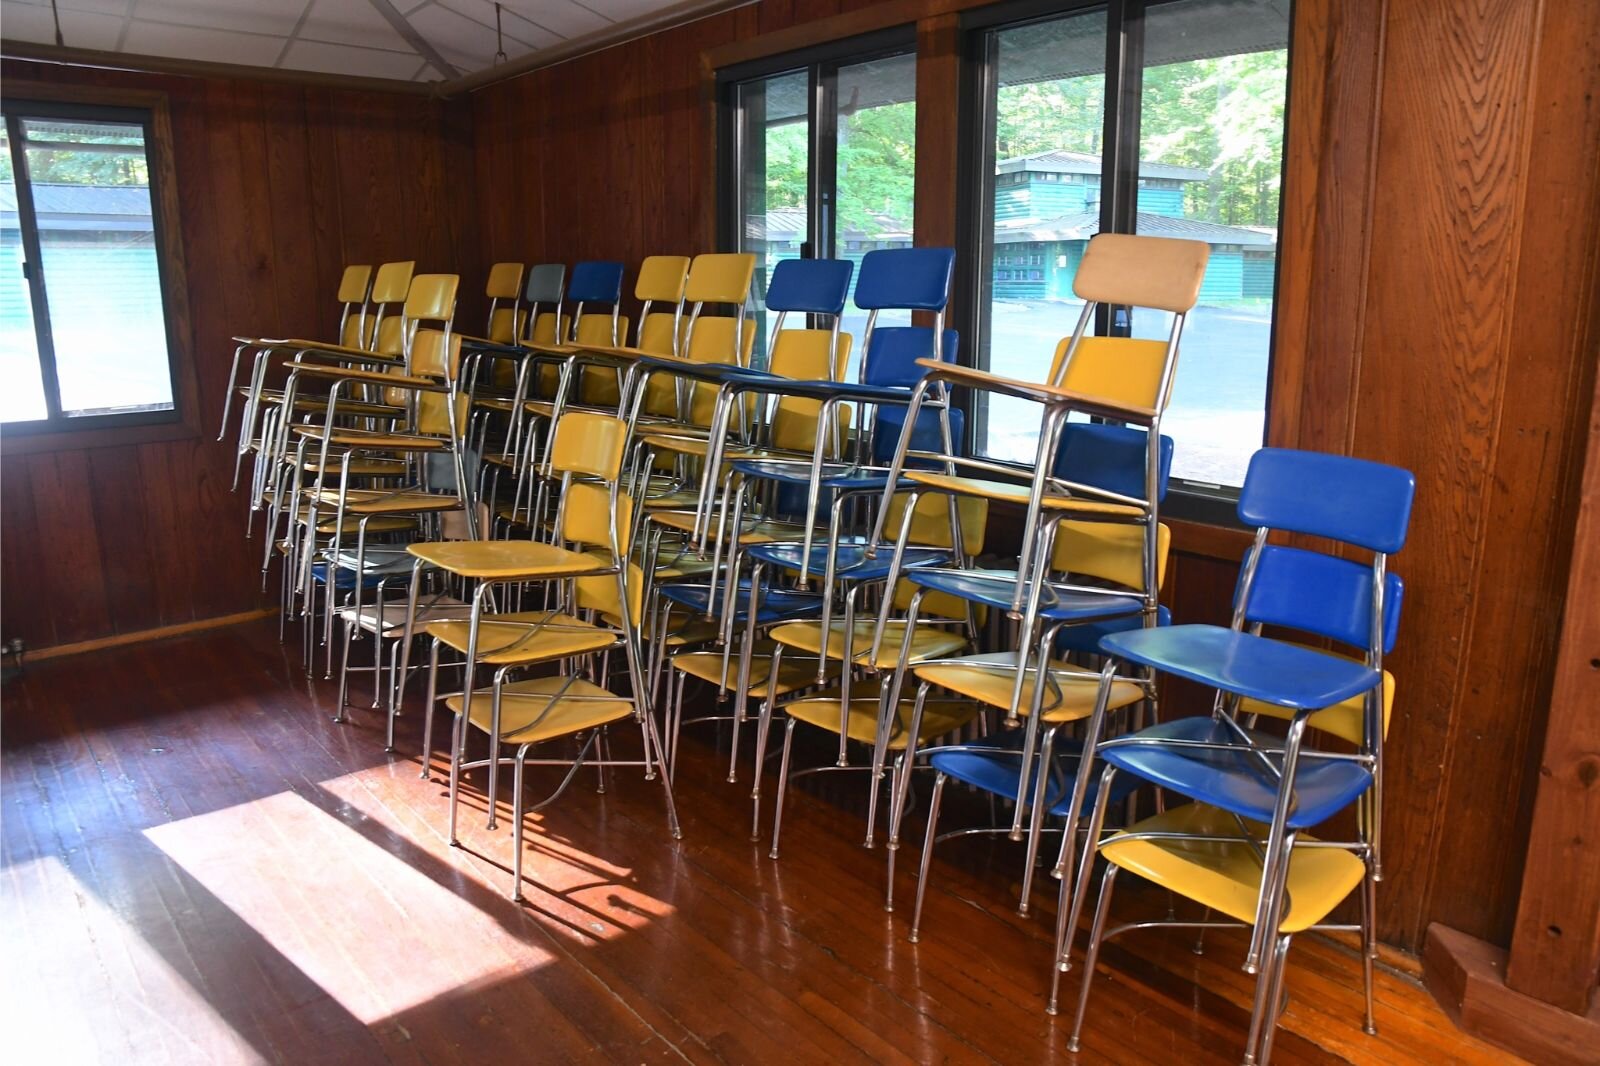 Chairs in the colors of Battle Creek Public Schools sit in a corner of the dining area of Clear Lake Camp.